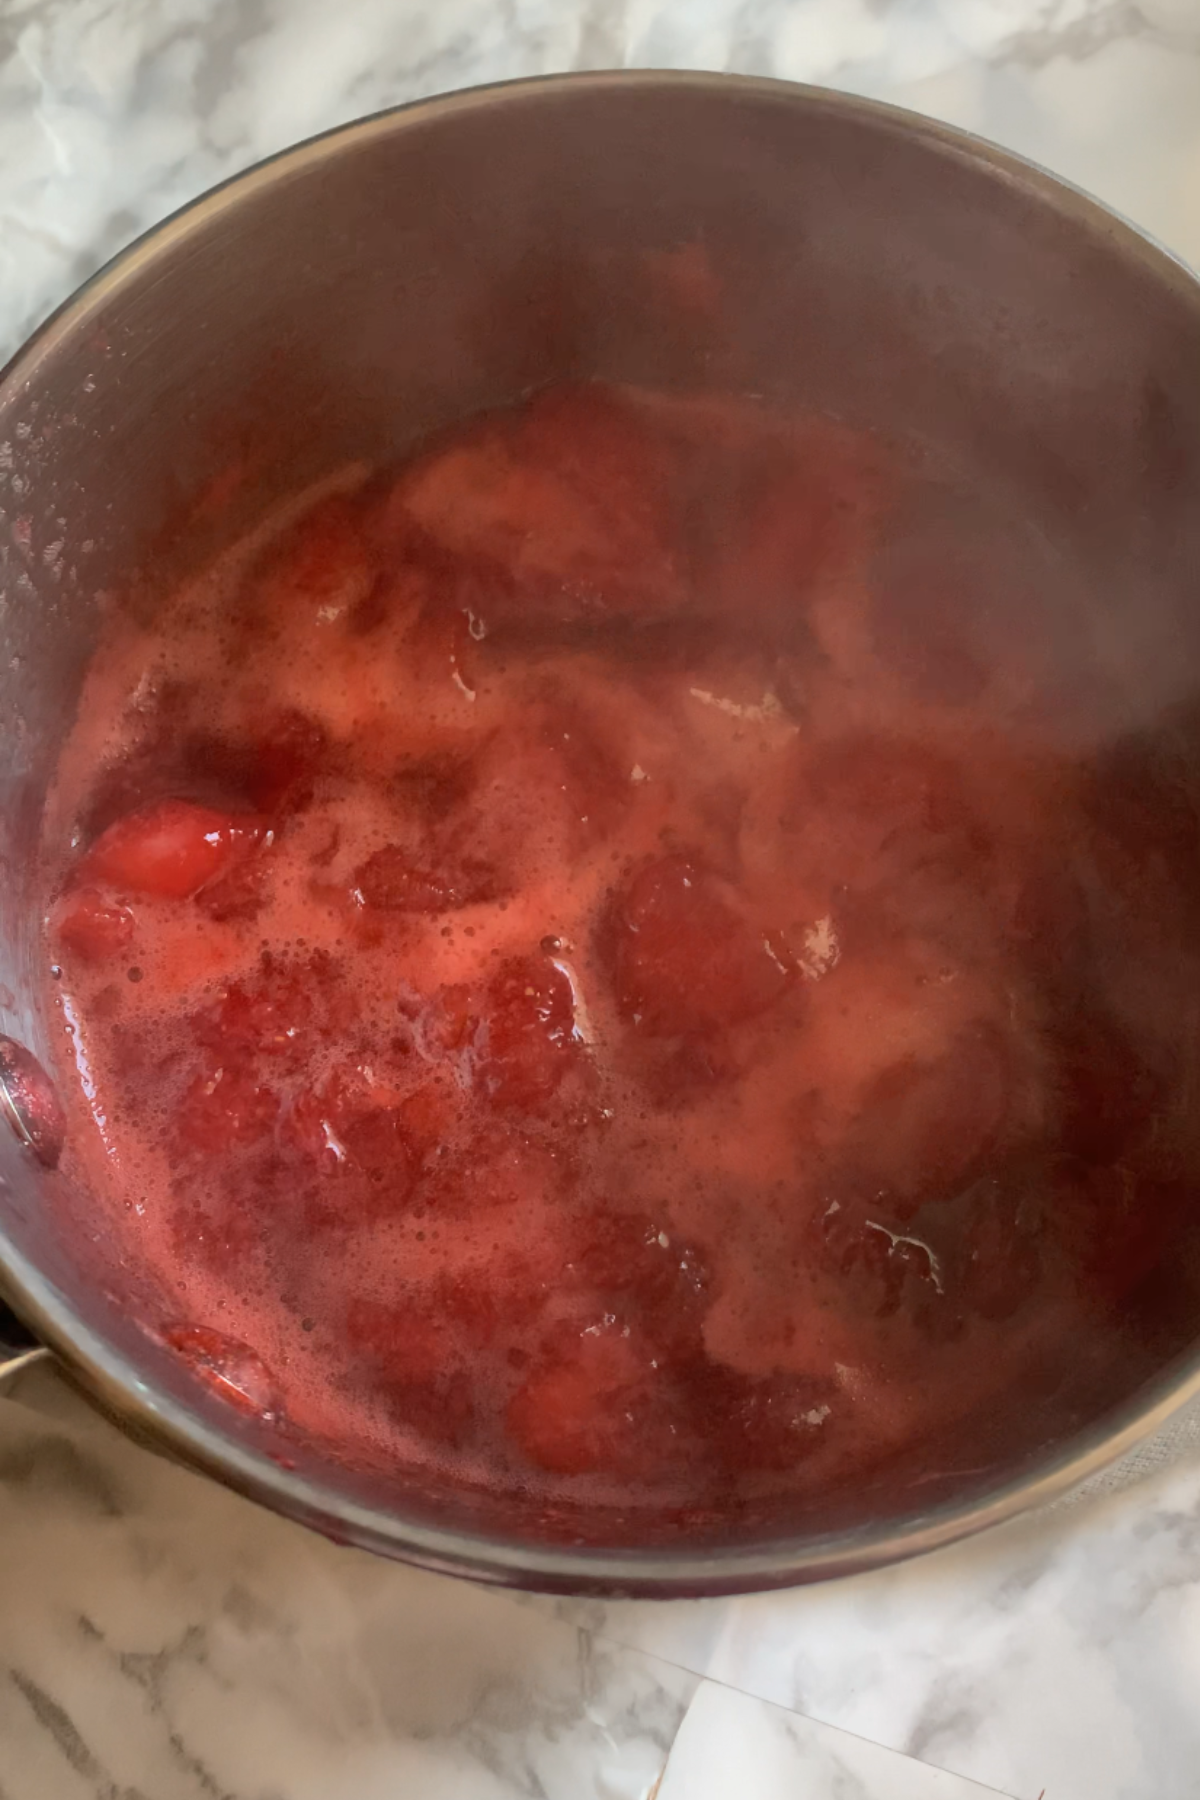 Making the strawberry sauce.